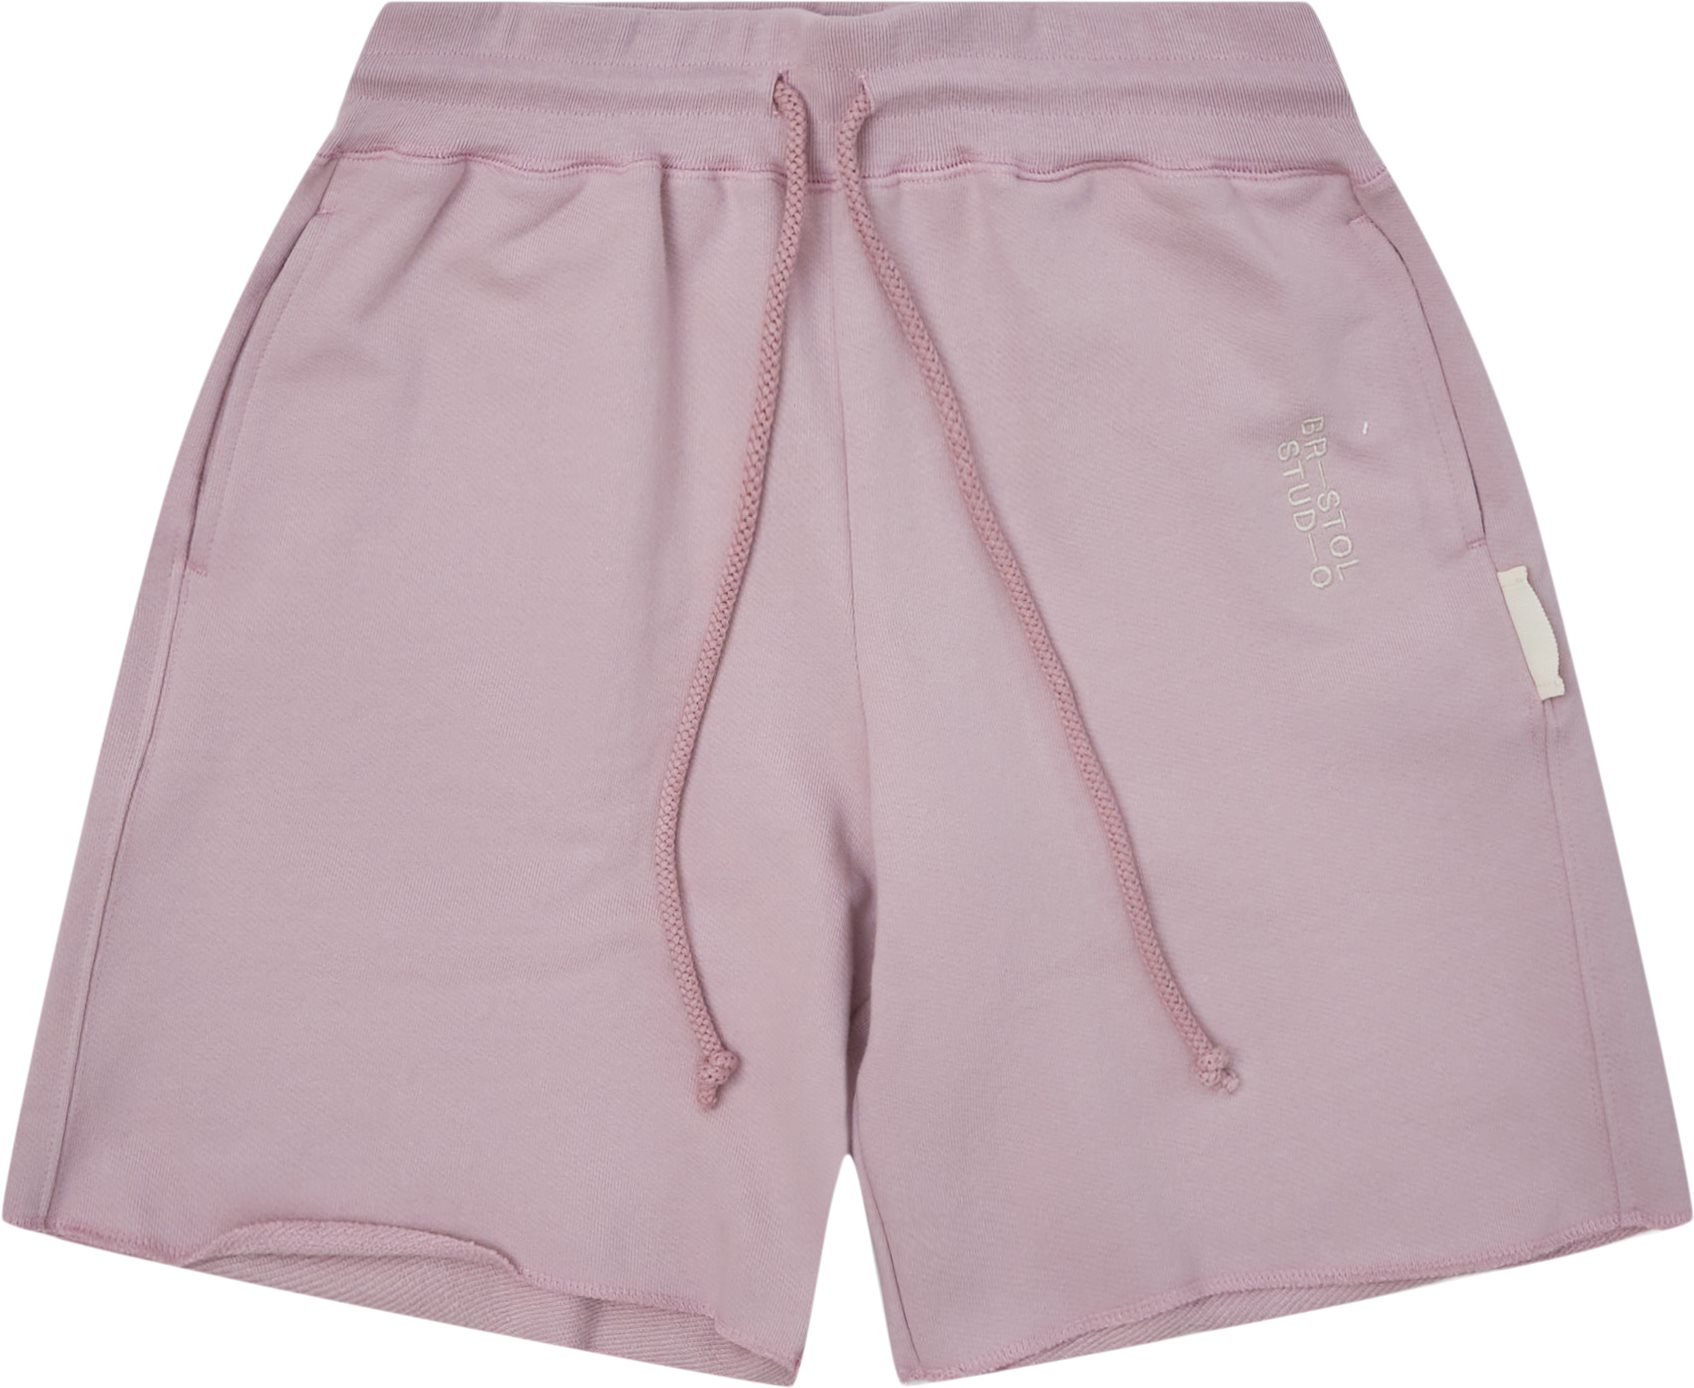 Home Team Sweat Shorts - Shorts - Loose fit - Lila